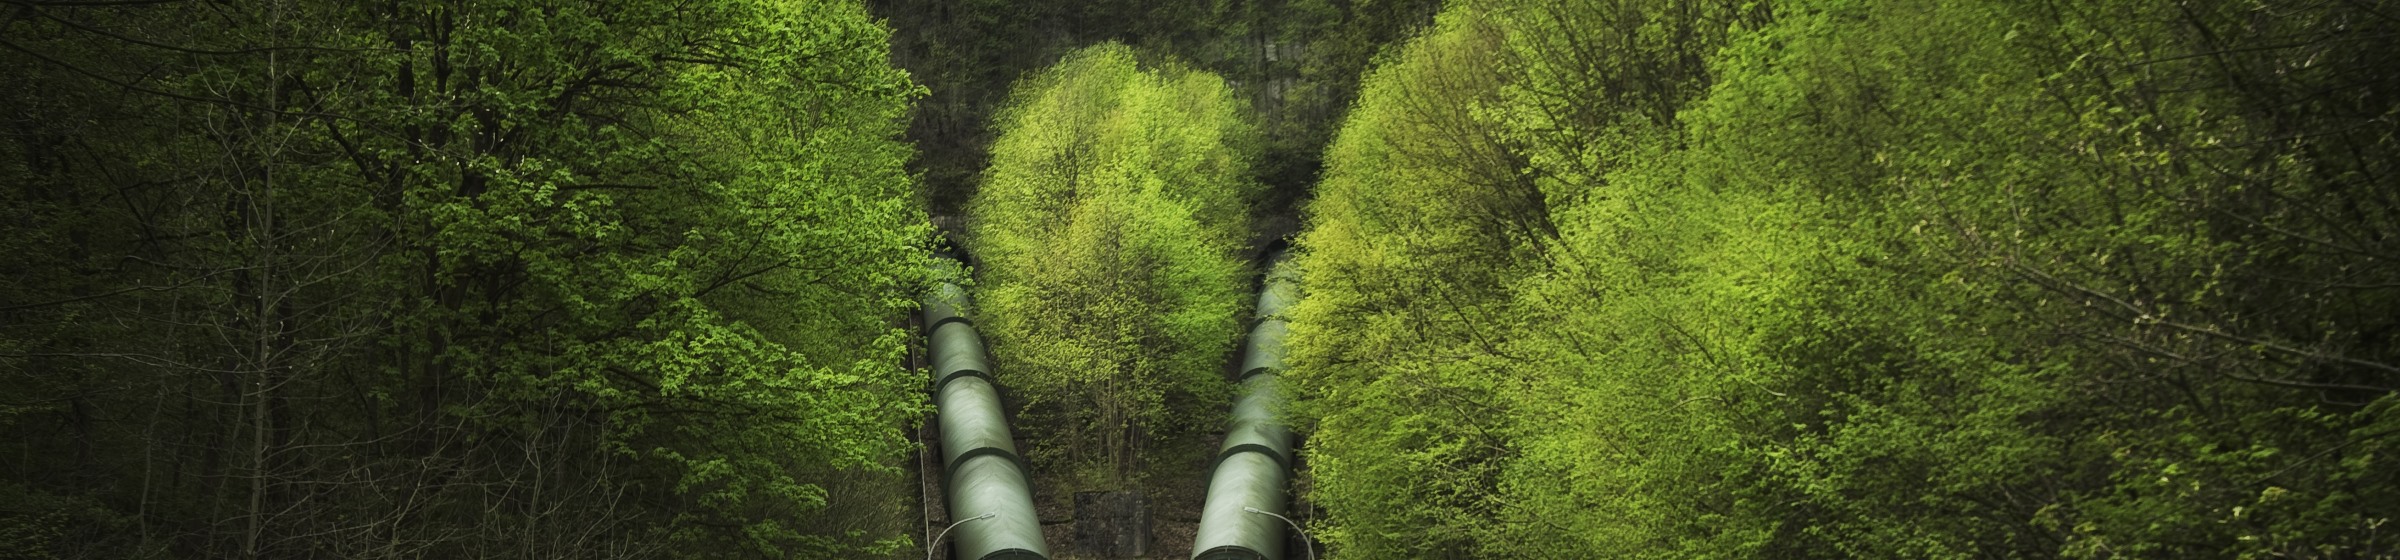 Pressure pipelines in forest